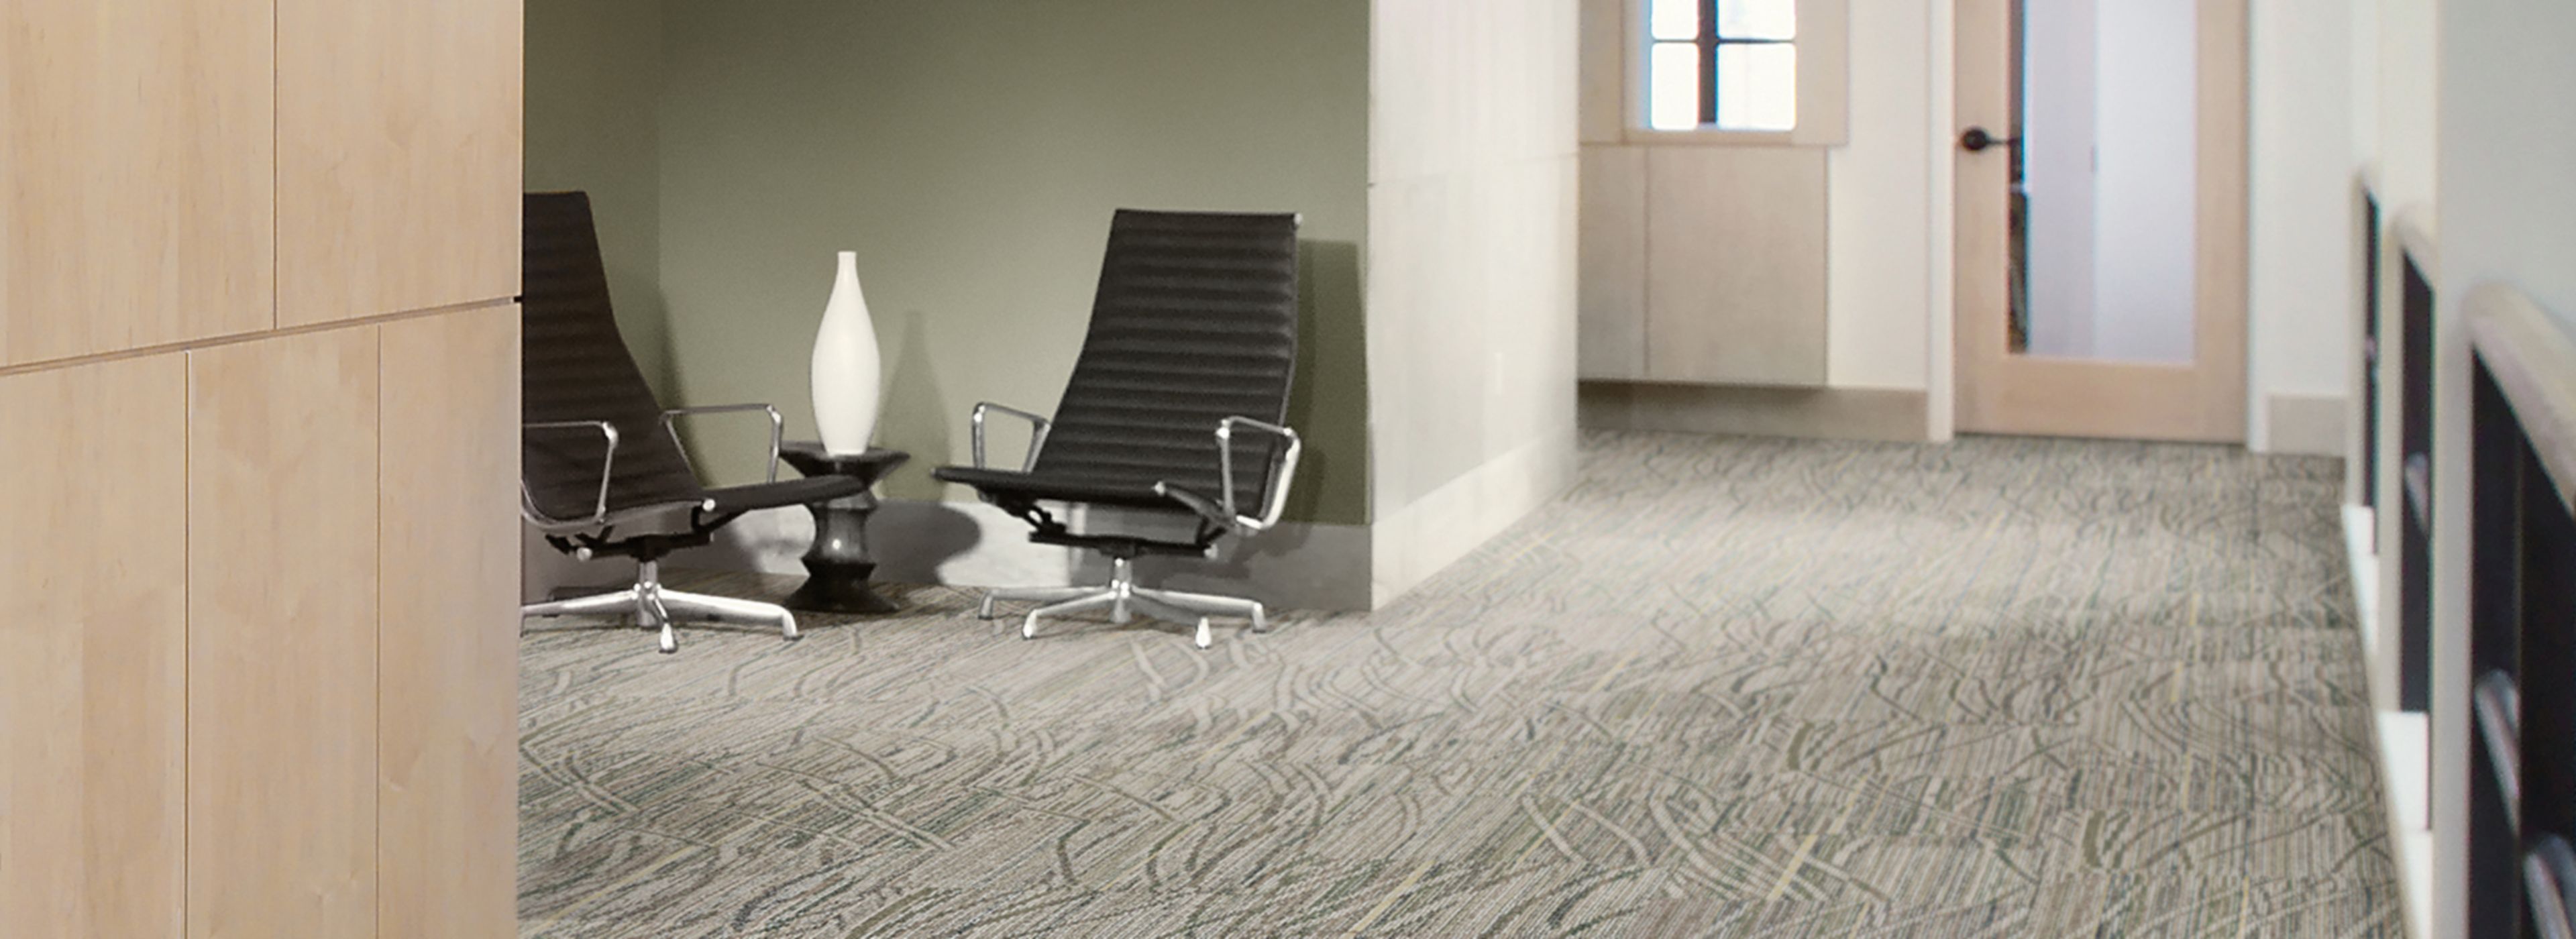 Interface Prairie Grass Loop carpet tile in corridor with seating area on side imagen número 1